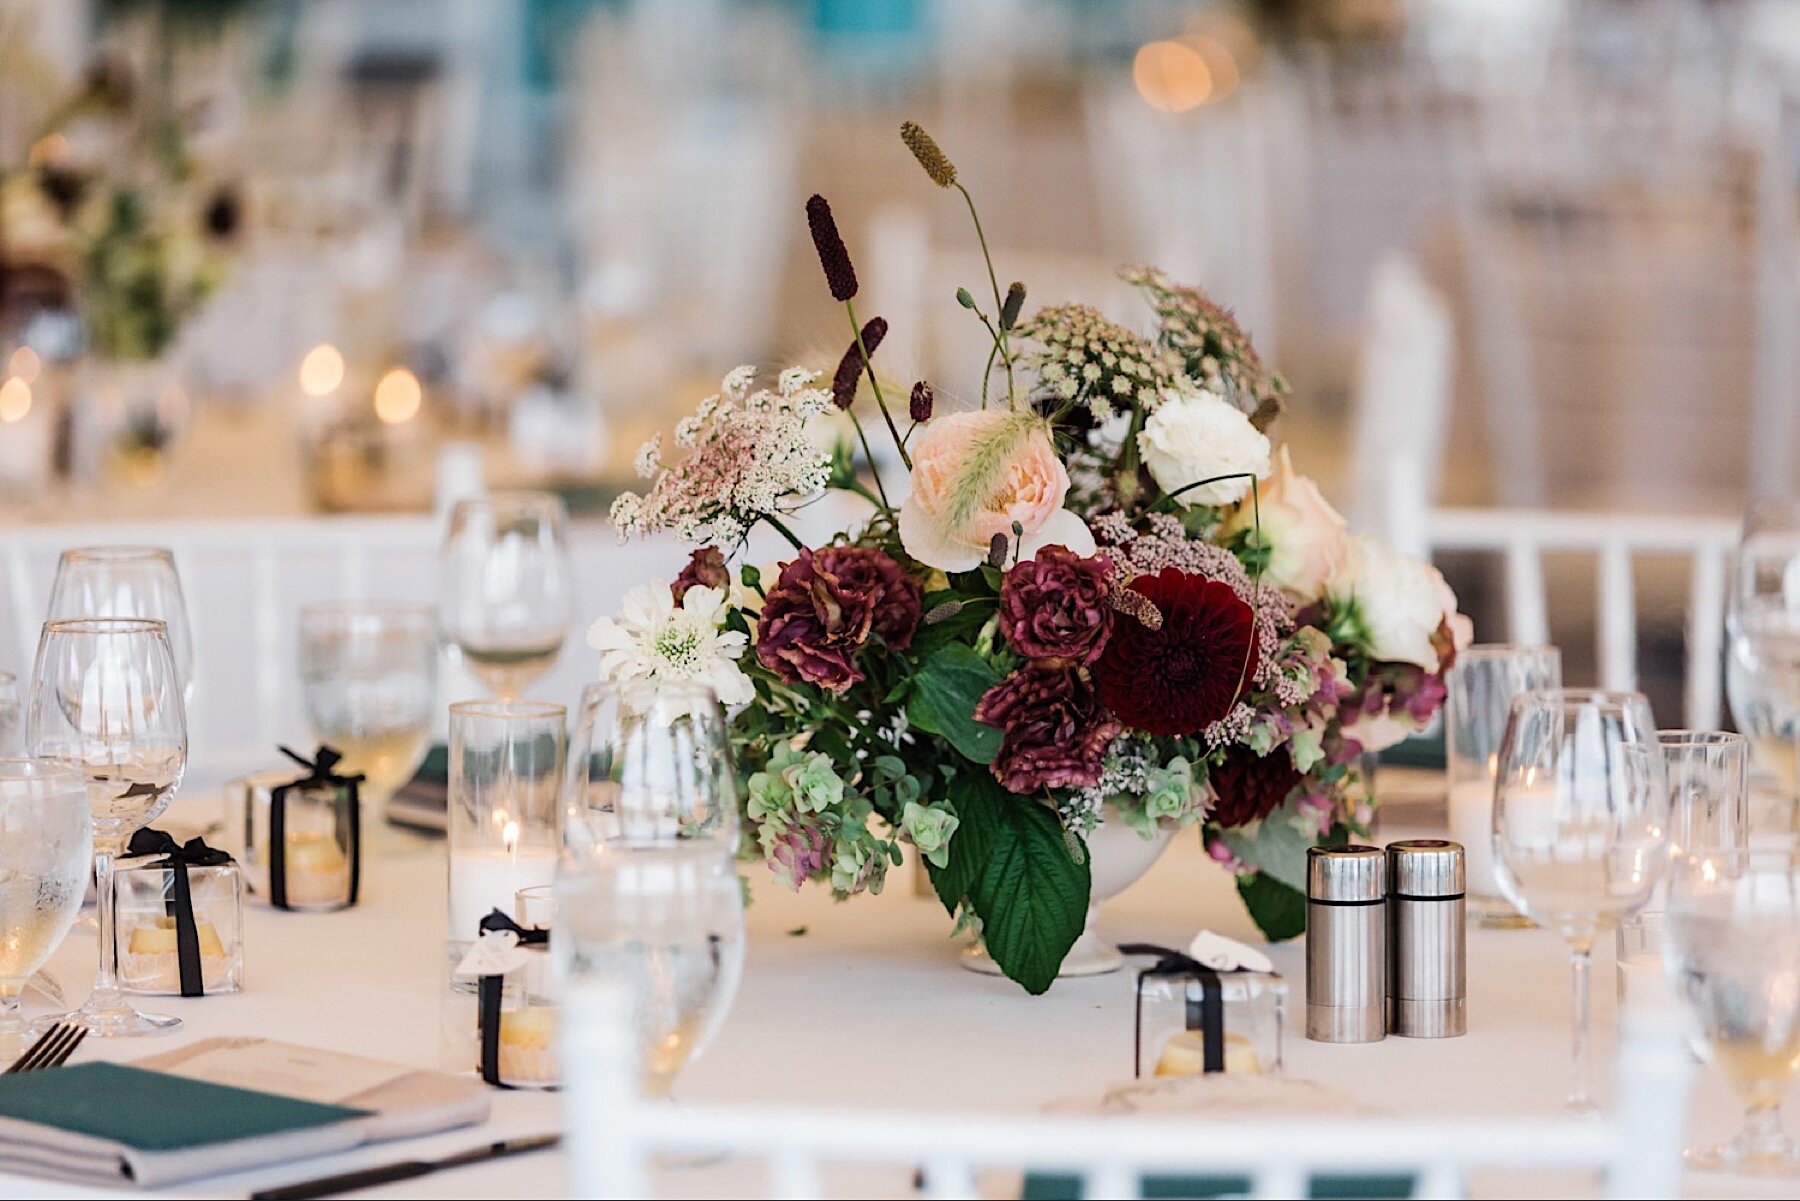 27_shaxton-ngo-440_A_Woodmark_floral_top_with_Florist_Gather_Design_from_Company_at_romantic_the_wedding_lush_Seattle_Wedding_design_Hotel.jpg